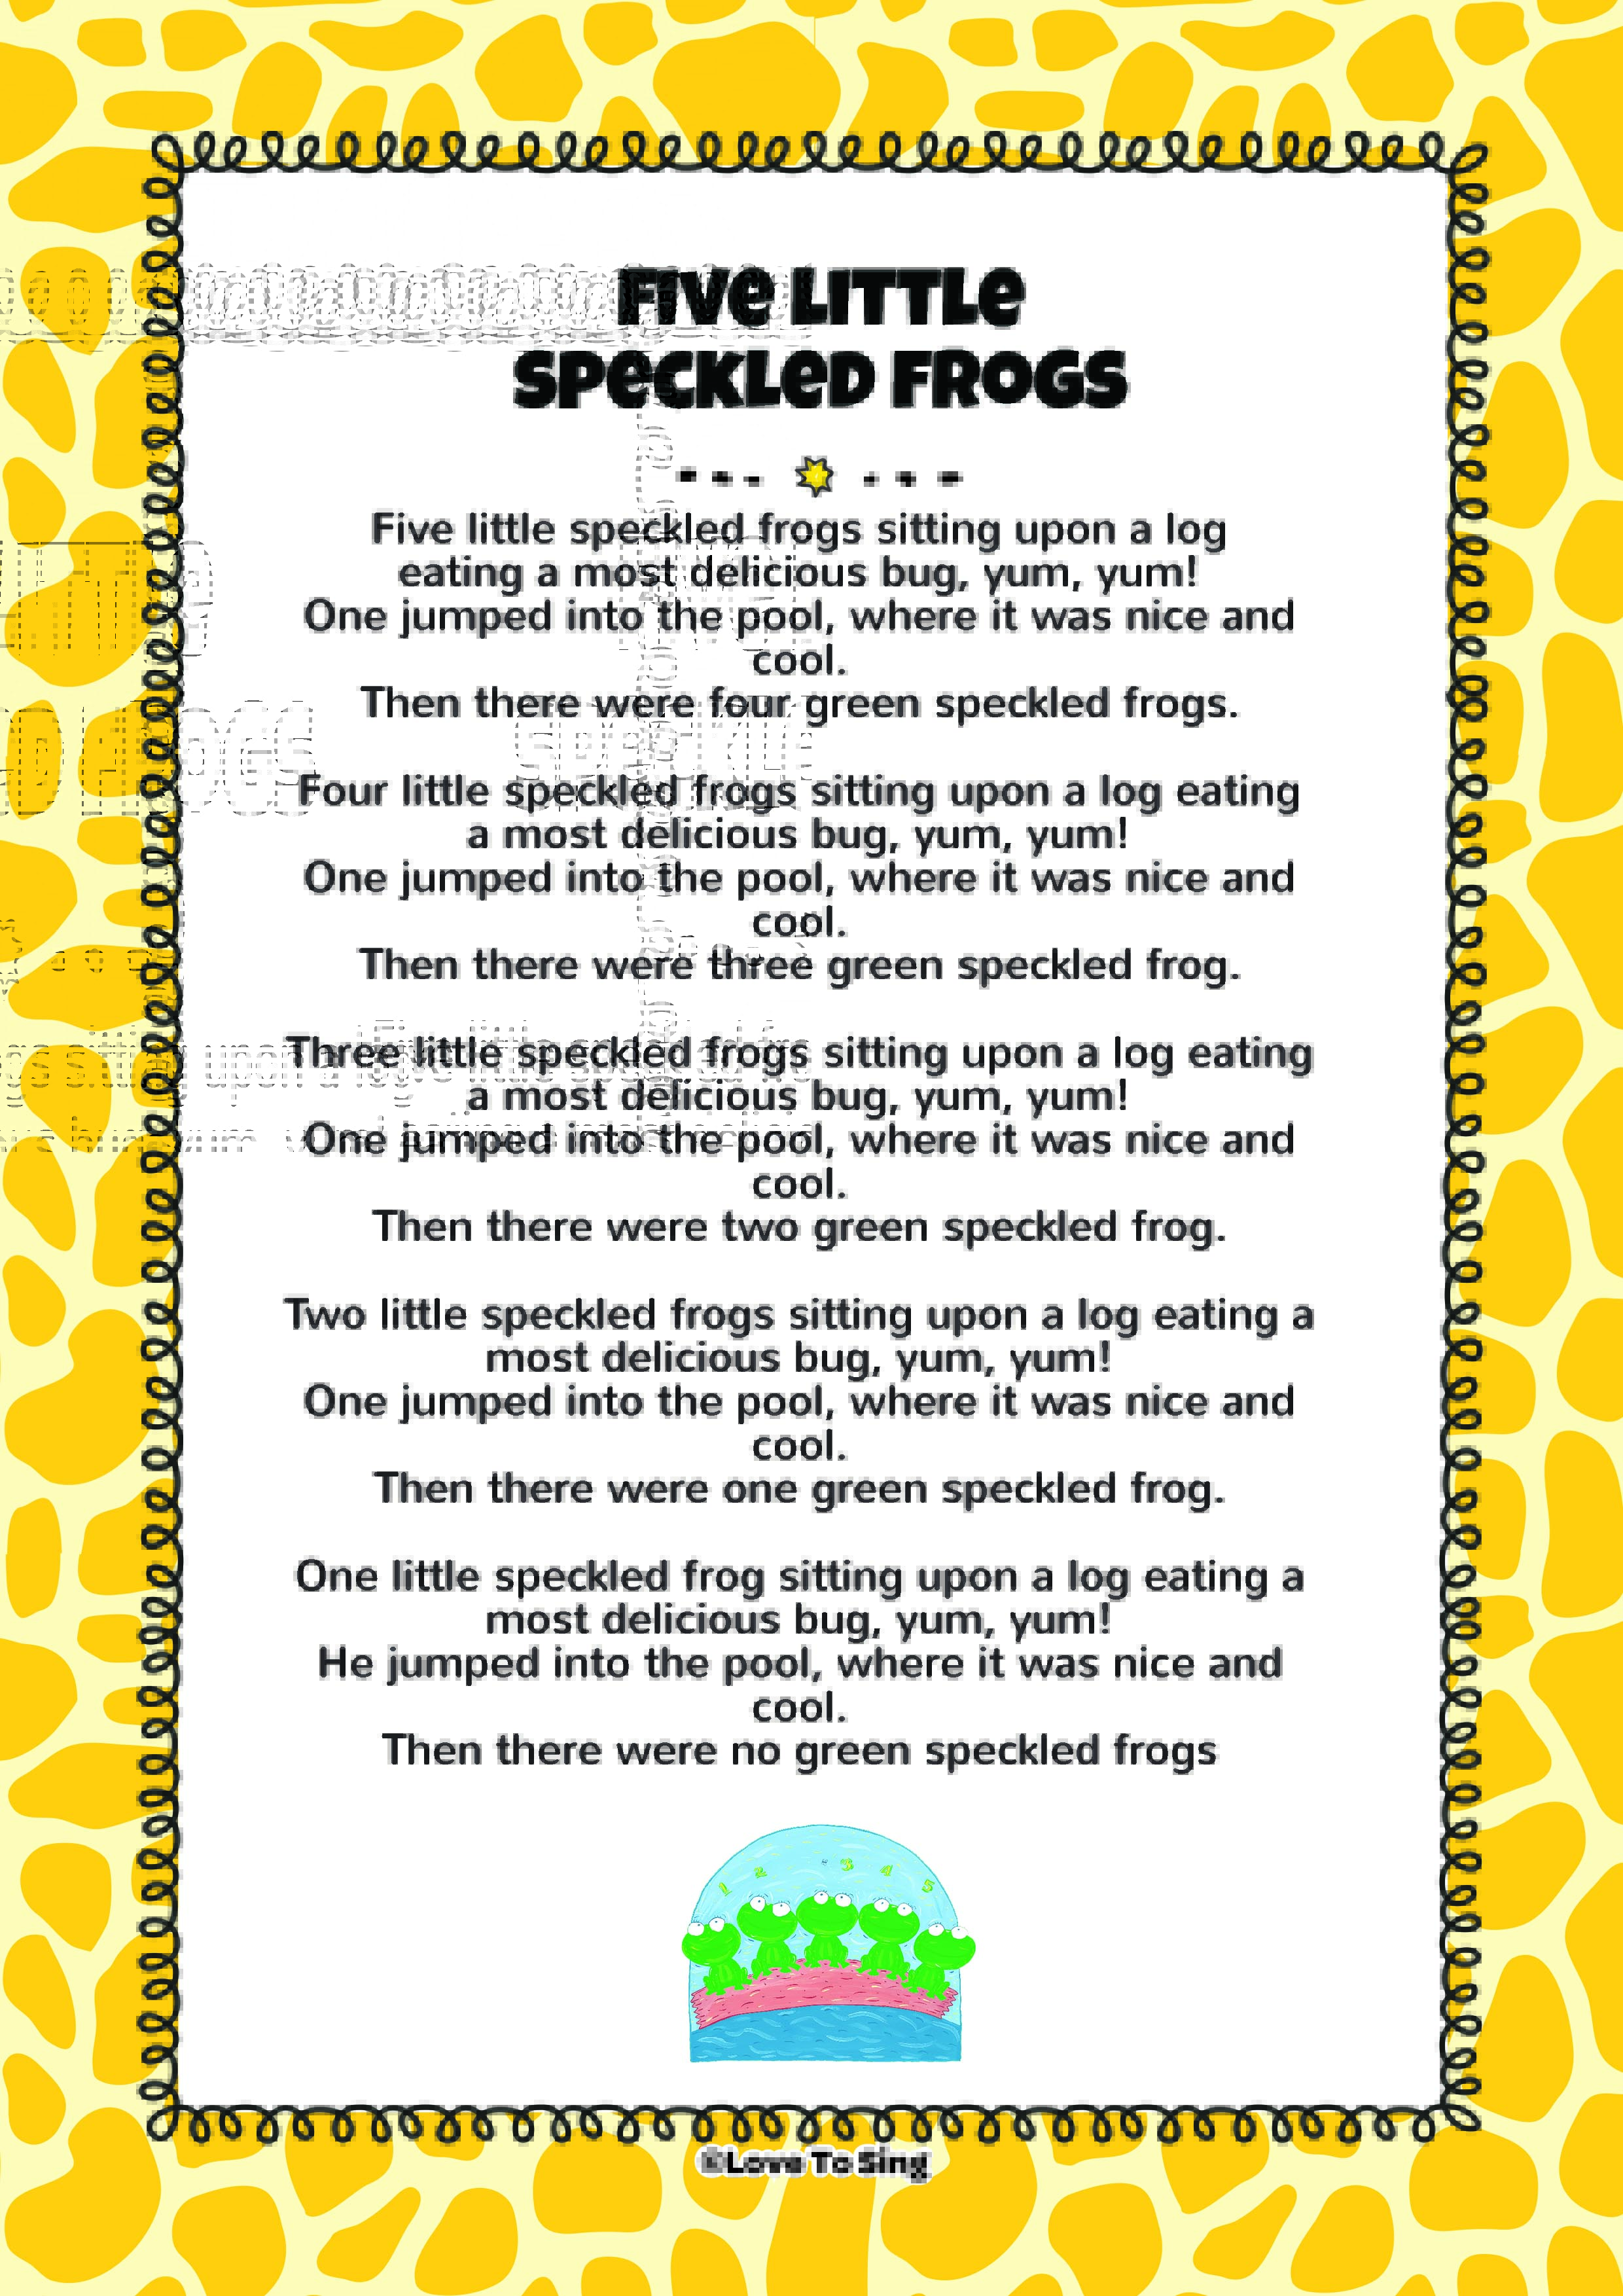 Five Little Speckled Frogs FREE Video Song, Lyrics & Activities